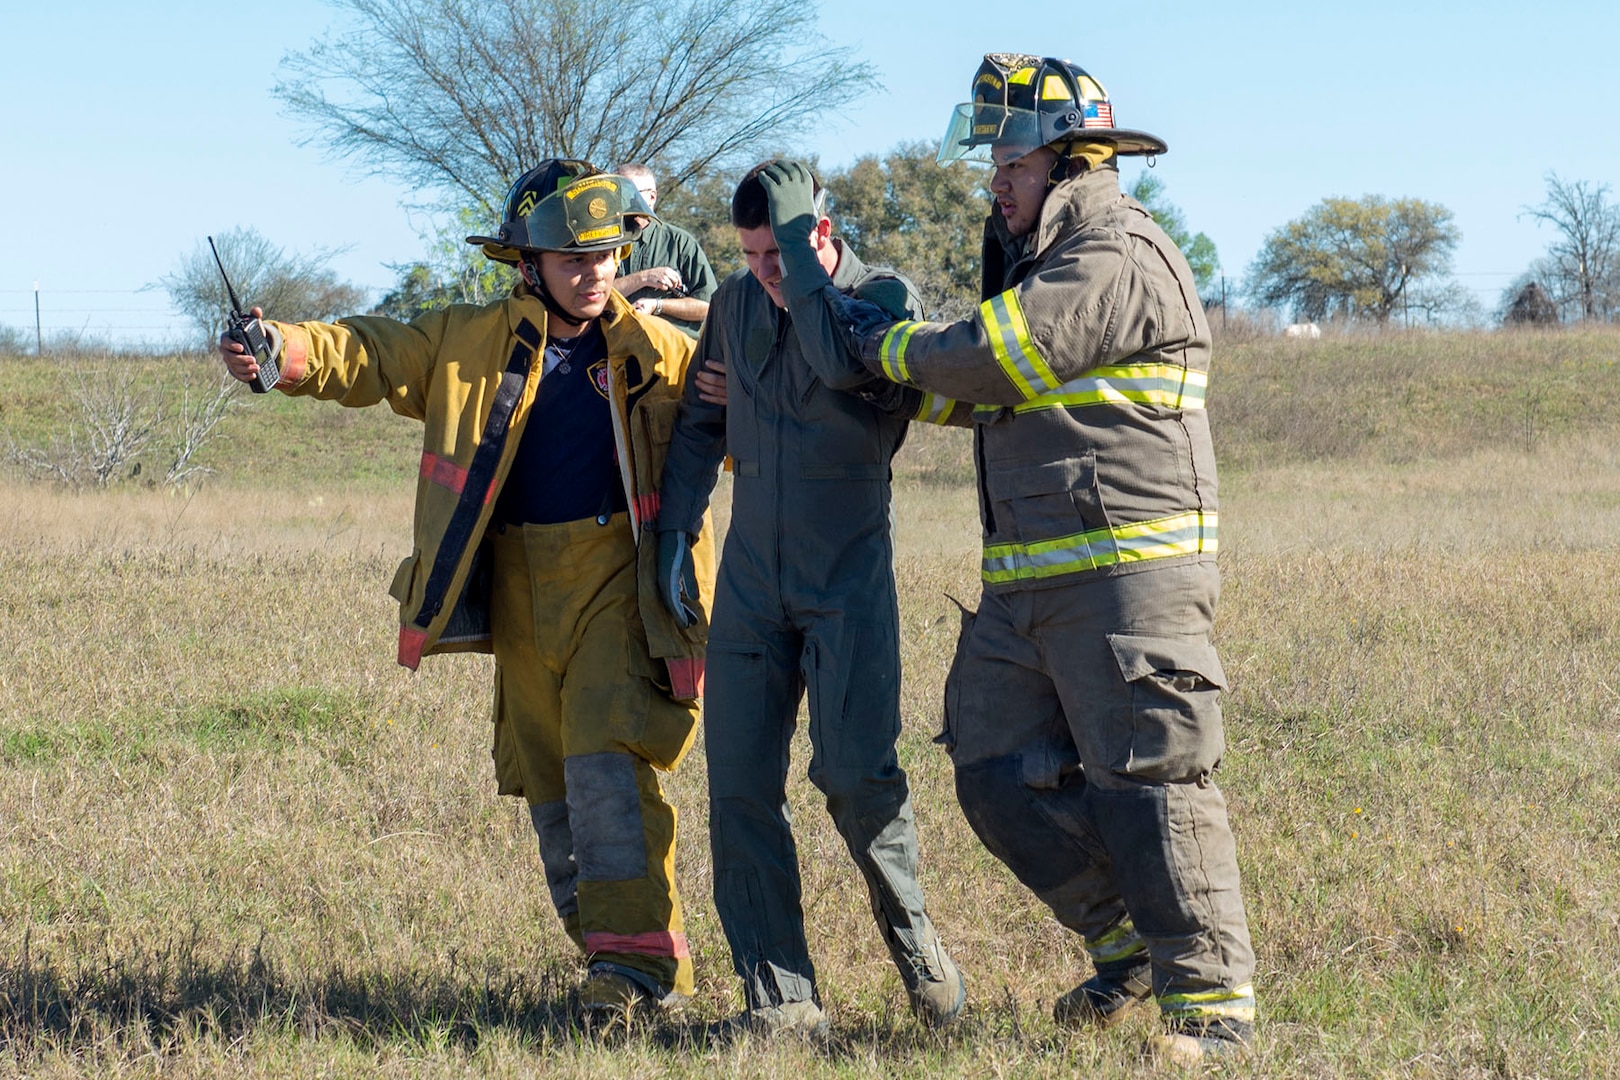 Members of the Atascosa Emergency Medical Services and the Somerset Volunteer Fire Department escort an aircrew member who was in a simulated plane crash to awaiting paramedics during a major accident response exercise (MARE) Feb. 22 in Somerset, Texas. The exercise was a joint undertaking between the 502nd Air Base Wing Inspector Generals office, Bexar County Emergency Management , the Atascosa County Emergency Medial Services and the Somerset Volunteer Firefighters Department to practice emergency response procedures in the event of an aircraft crash. As San Antonio is surrounded by smaller counties, the exercise displayed the joint efforts required to respond to off base incidents and strengthened the working relationship between Joint Base San Antonio and the surrounding communities.